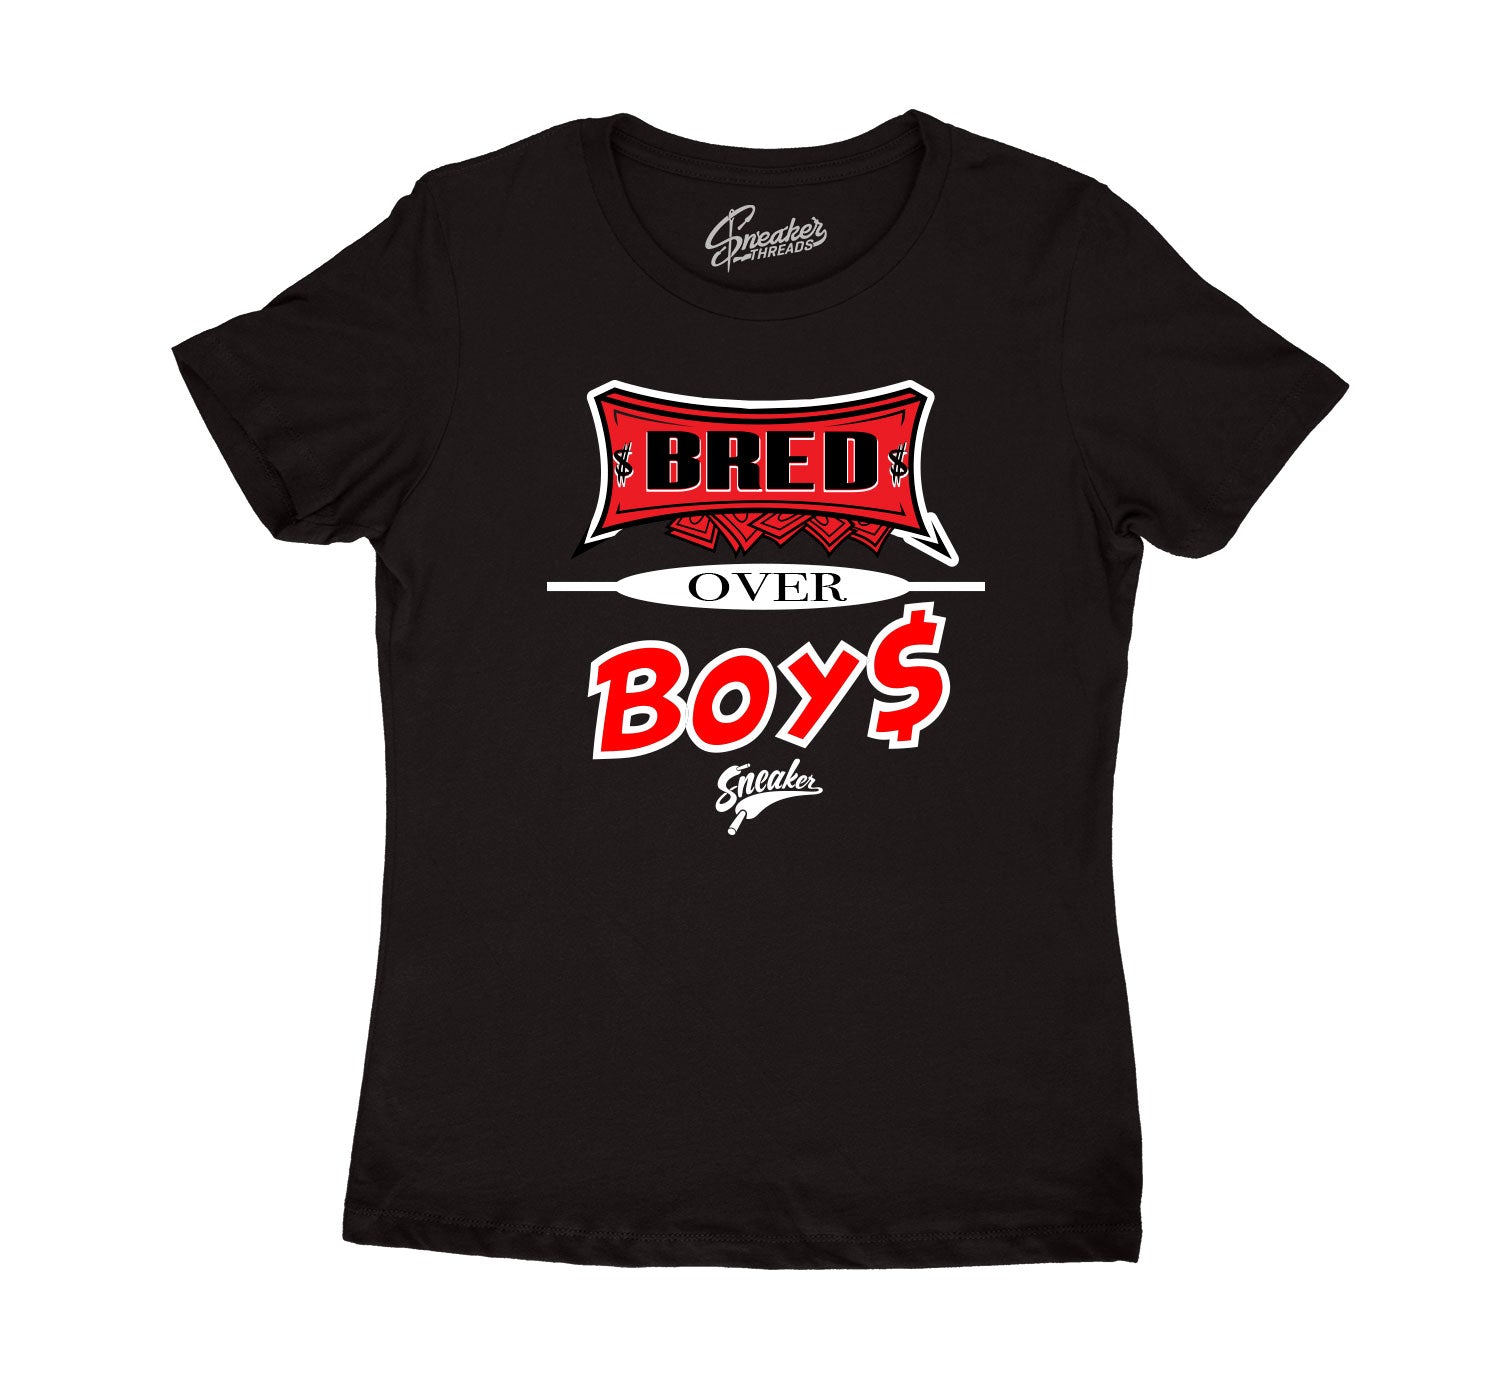 Womens sneaker tees match retro 11s bred shoes perfectly.